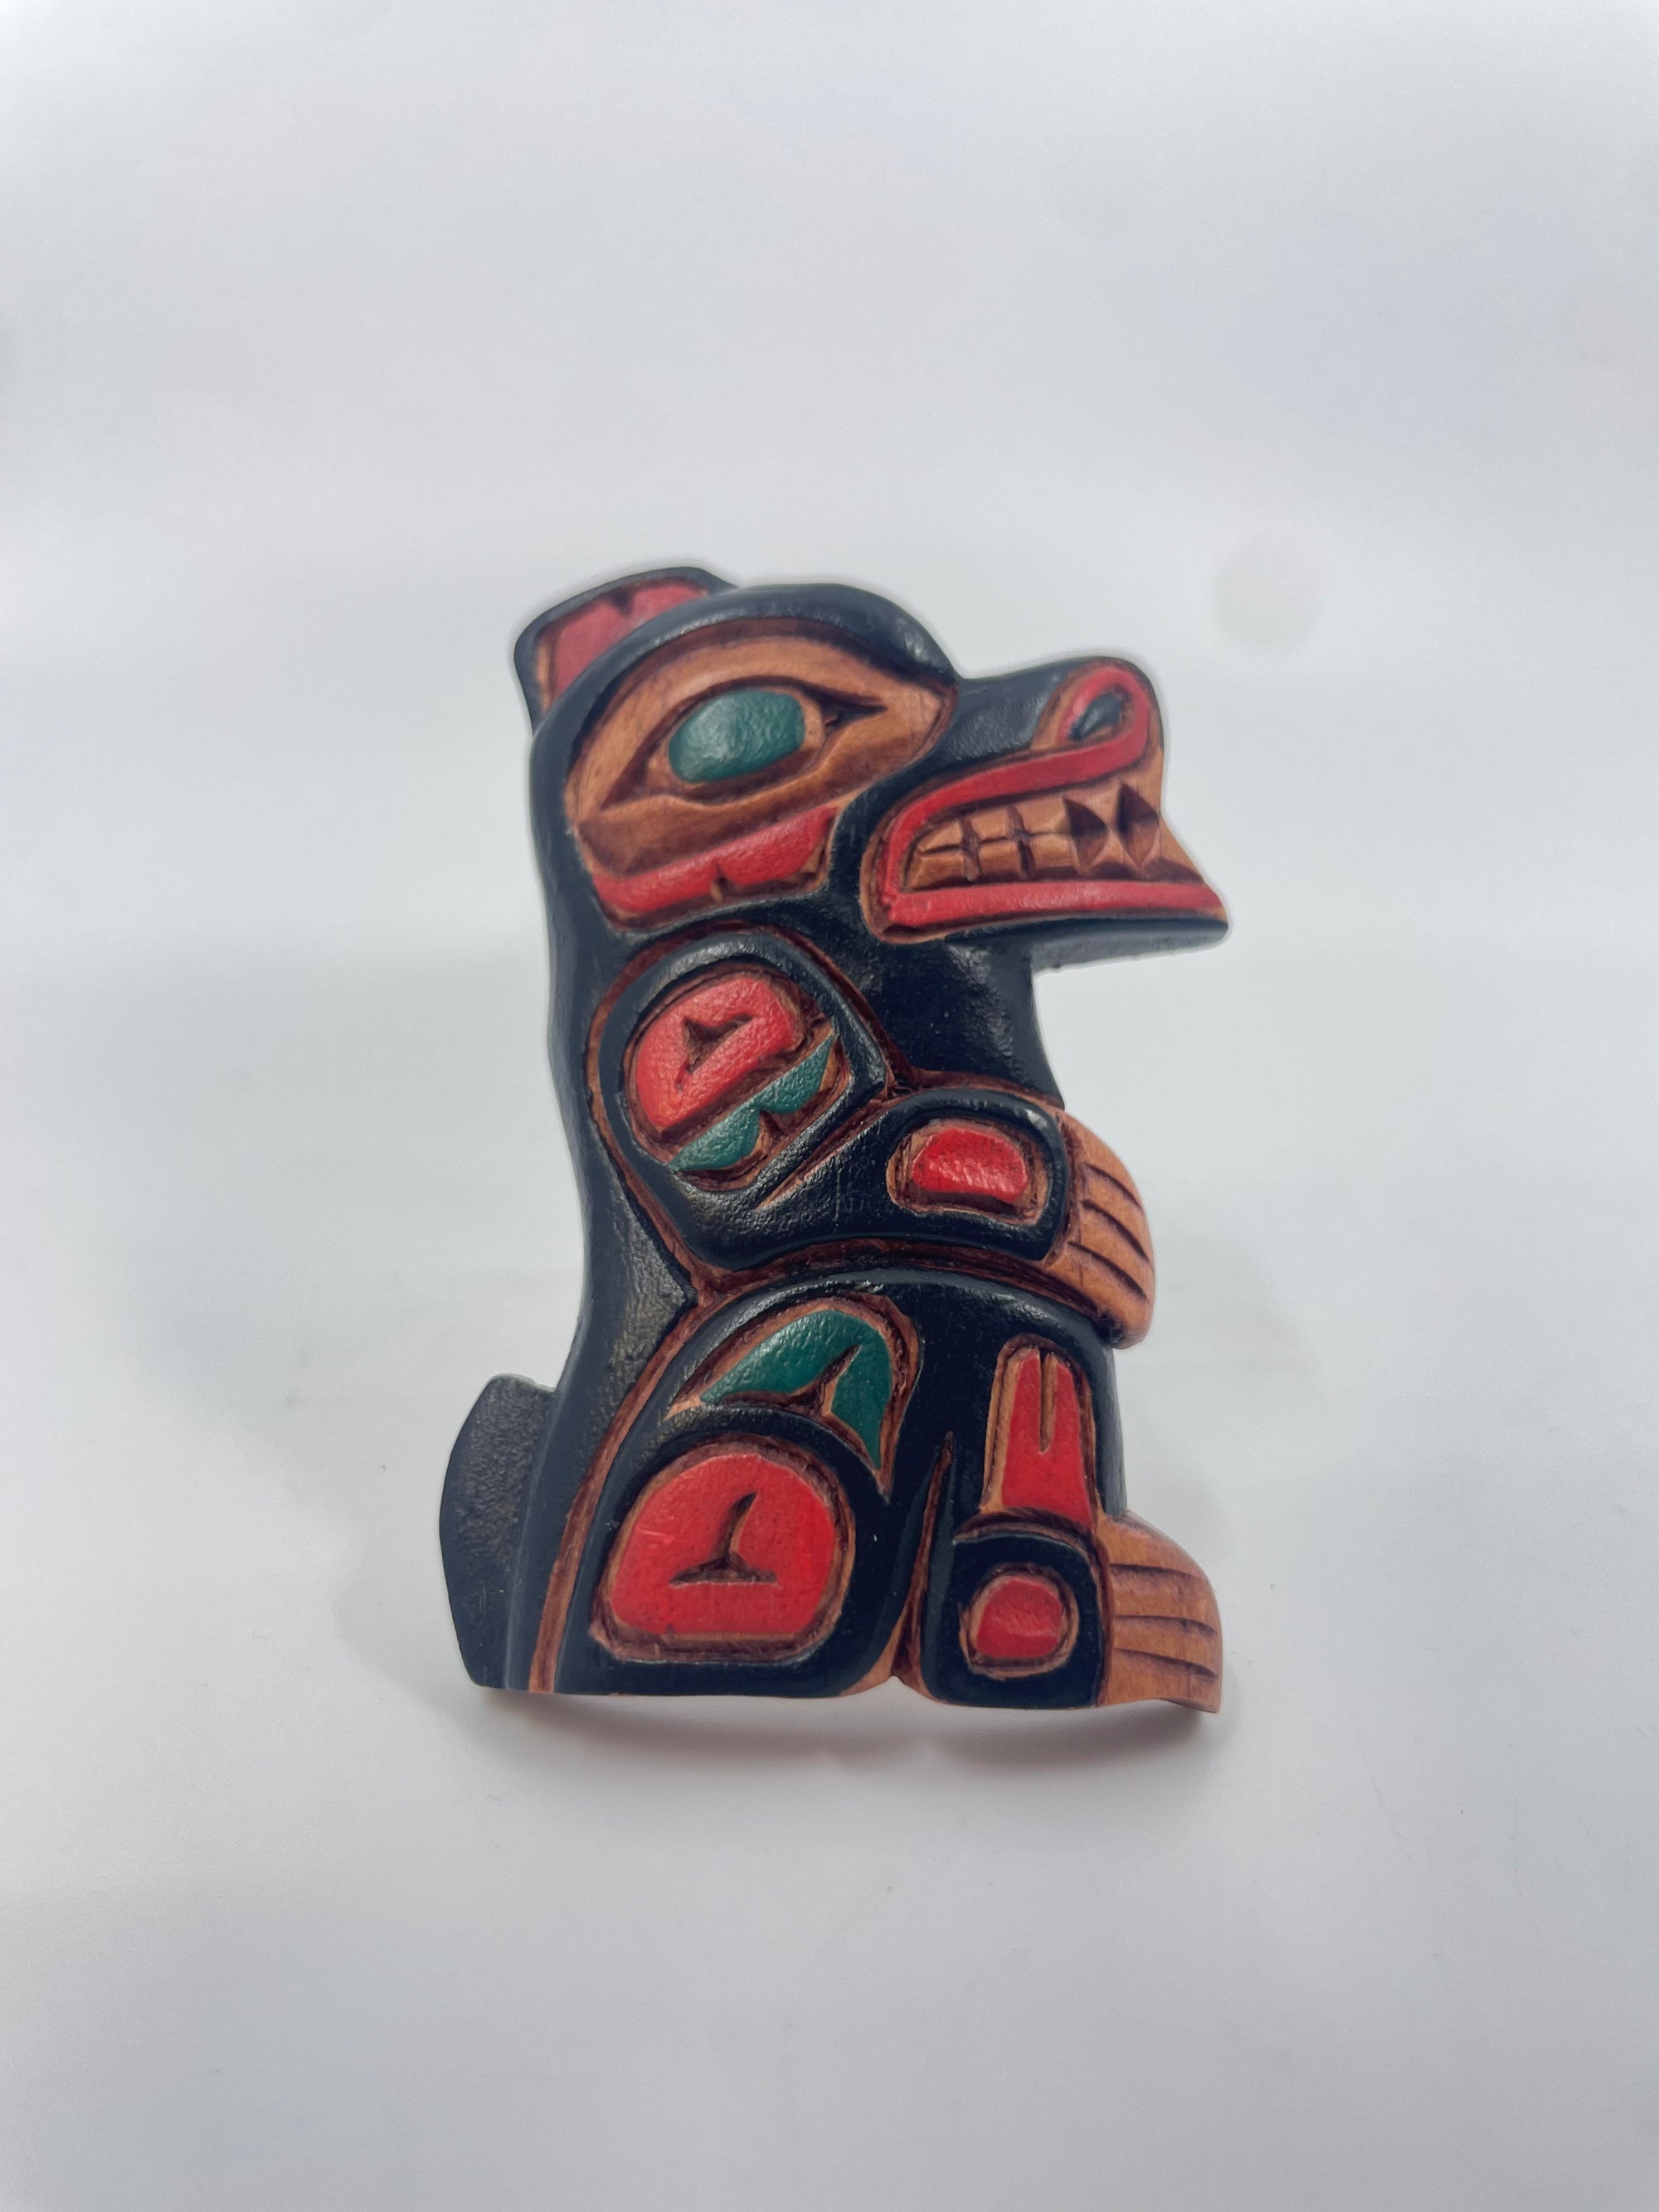 Artie George Magnets - Bear - WM-Magnets-2 - House of Himwitsa Native Art Gallery and Gifts